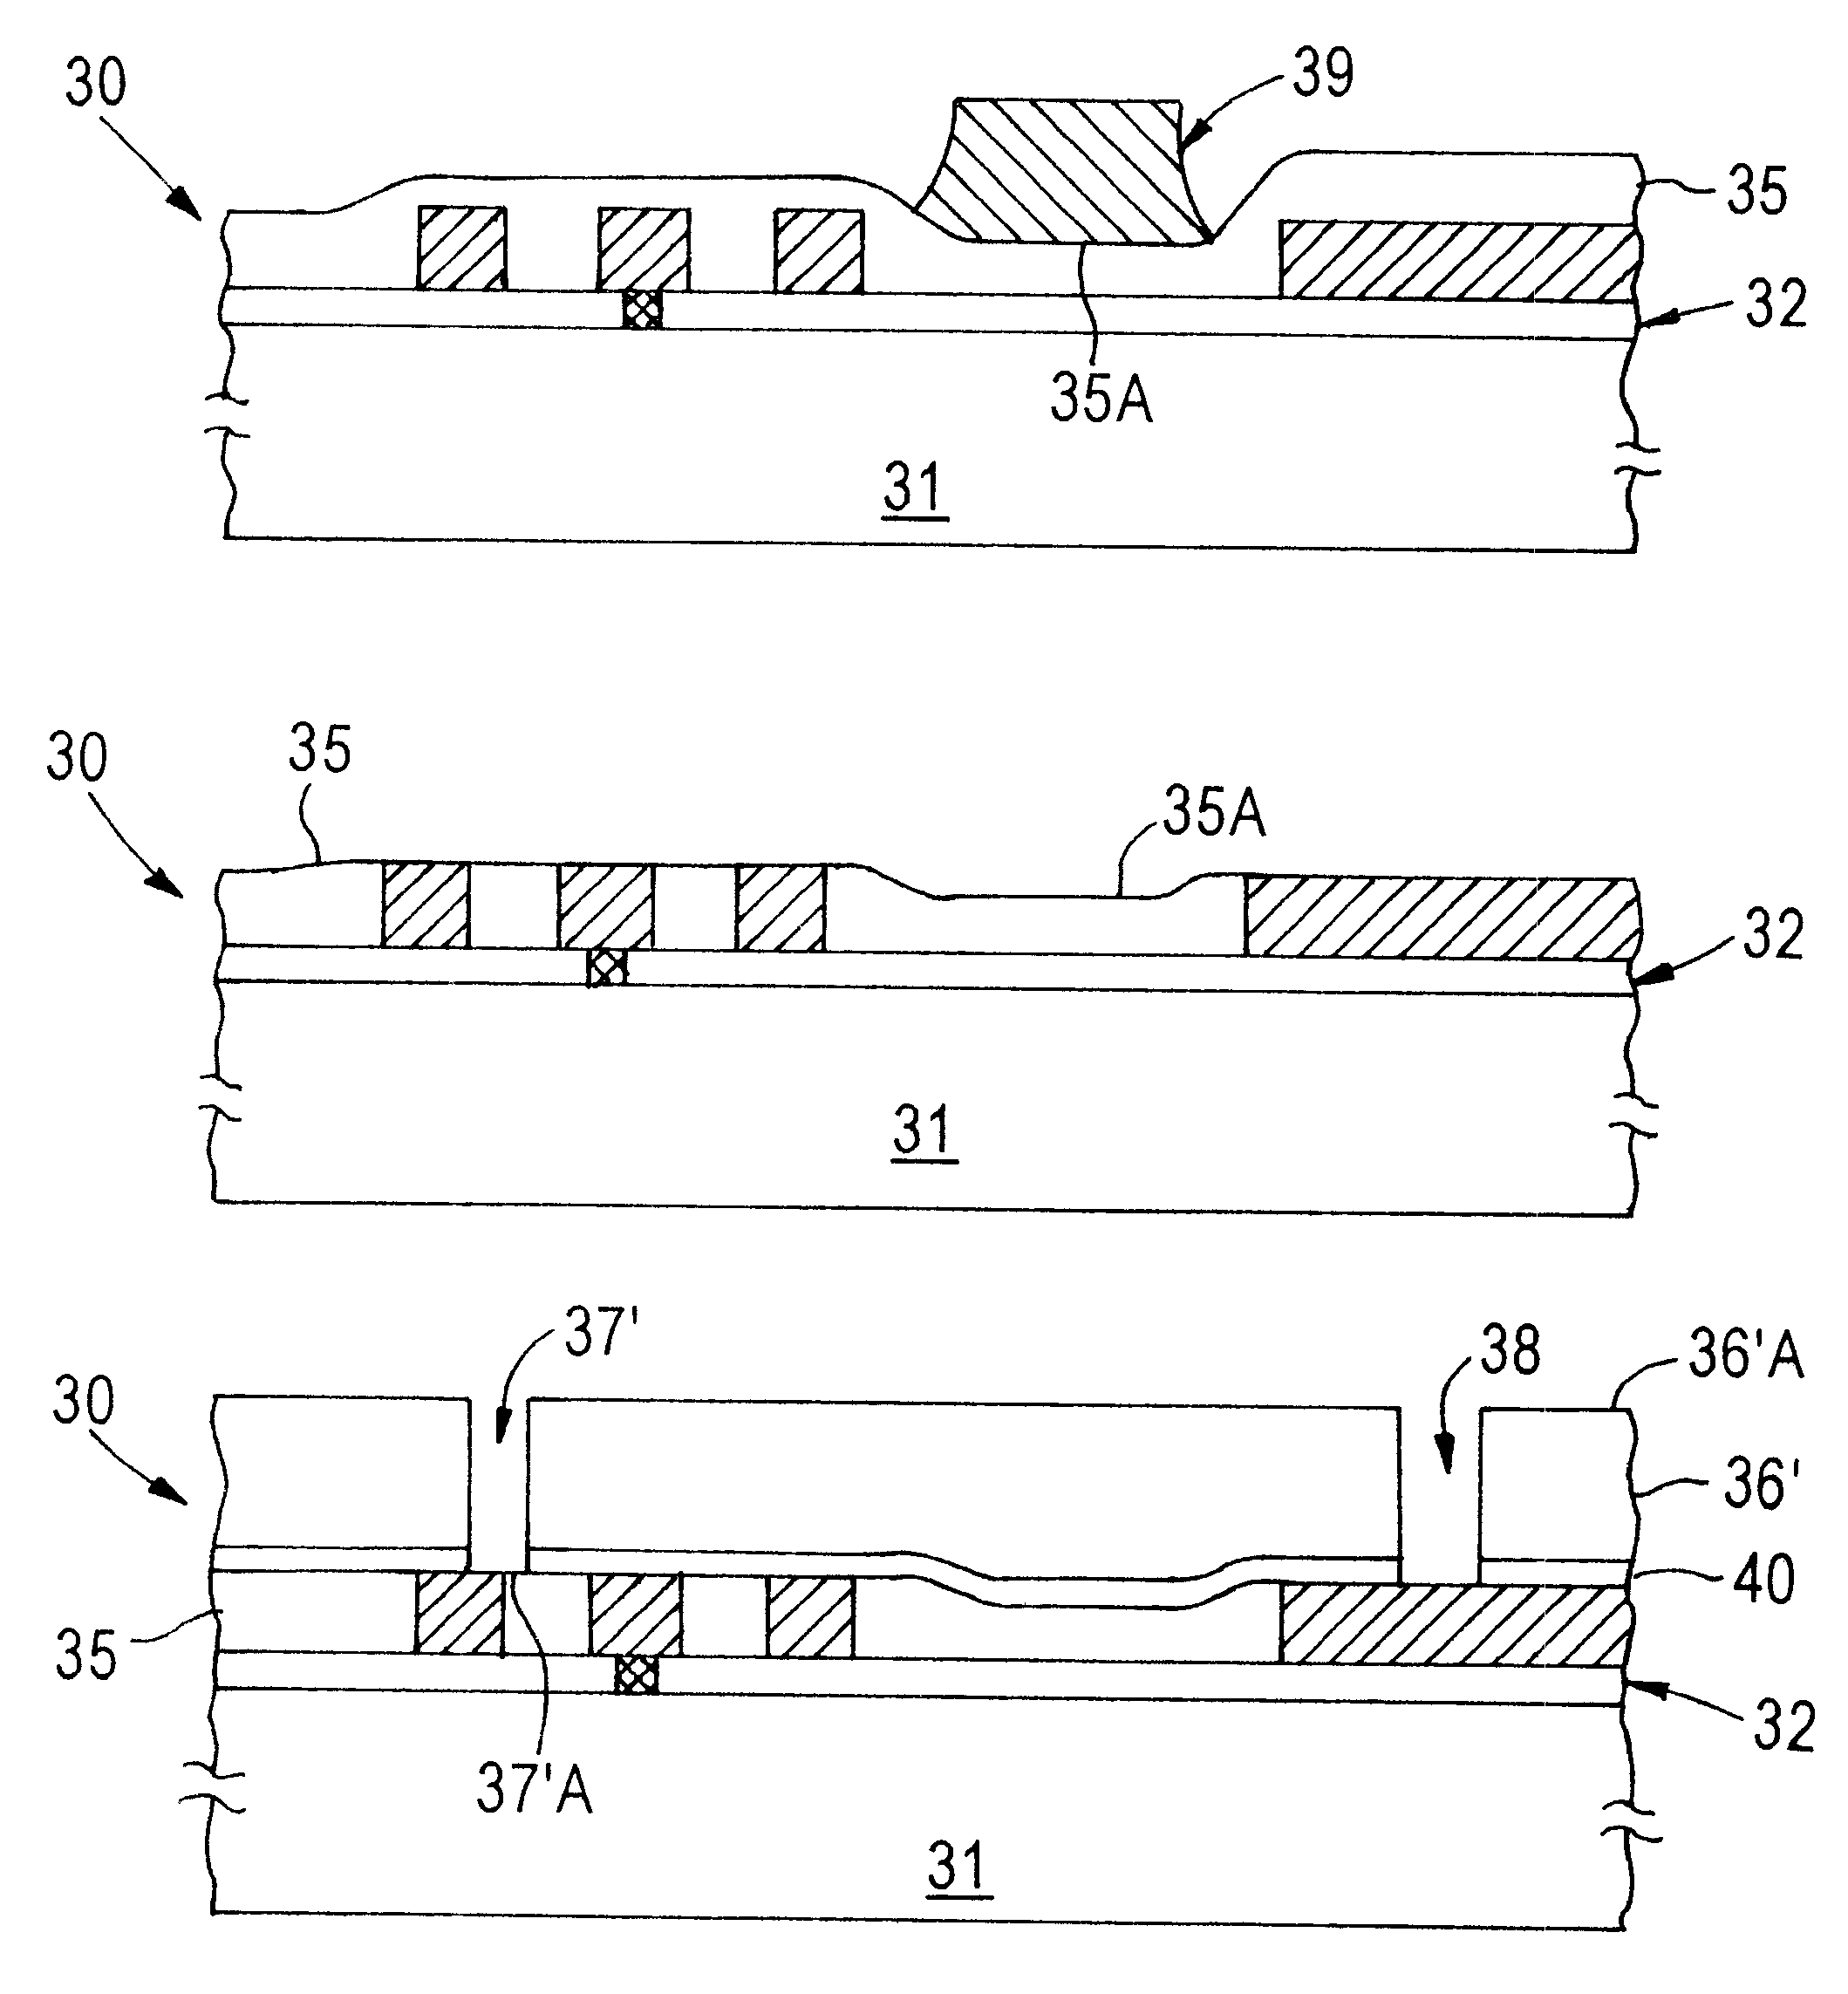 Reverse mask and nitride layer deposition for reduction of vertical capacitance variation in multi-layer metallization systems